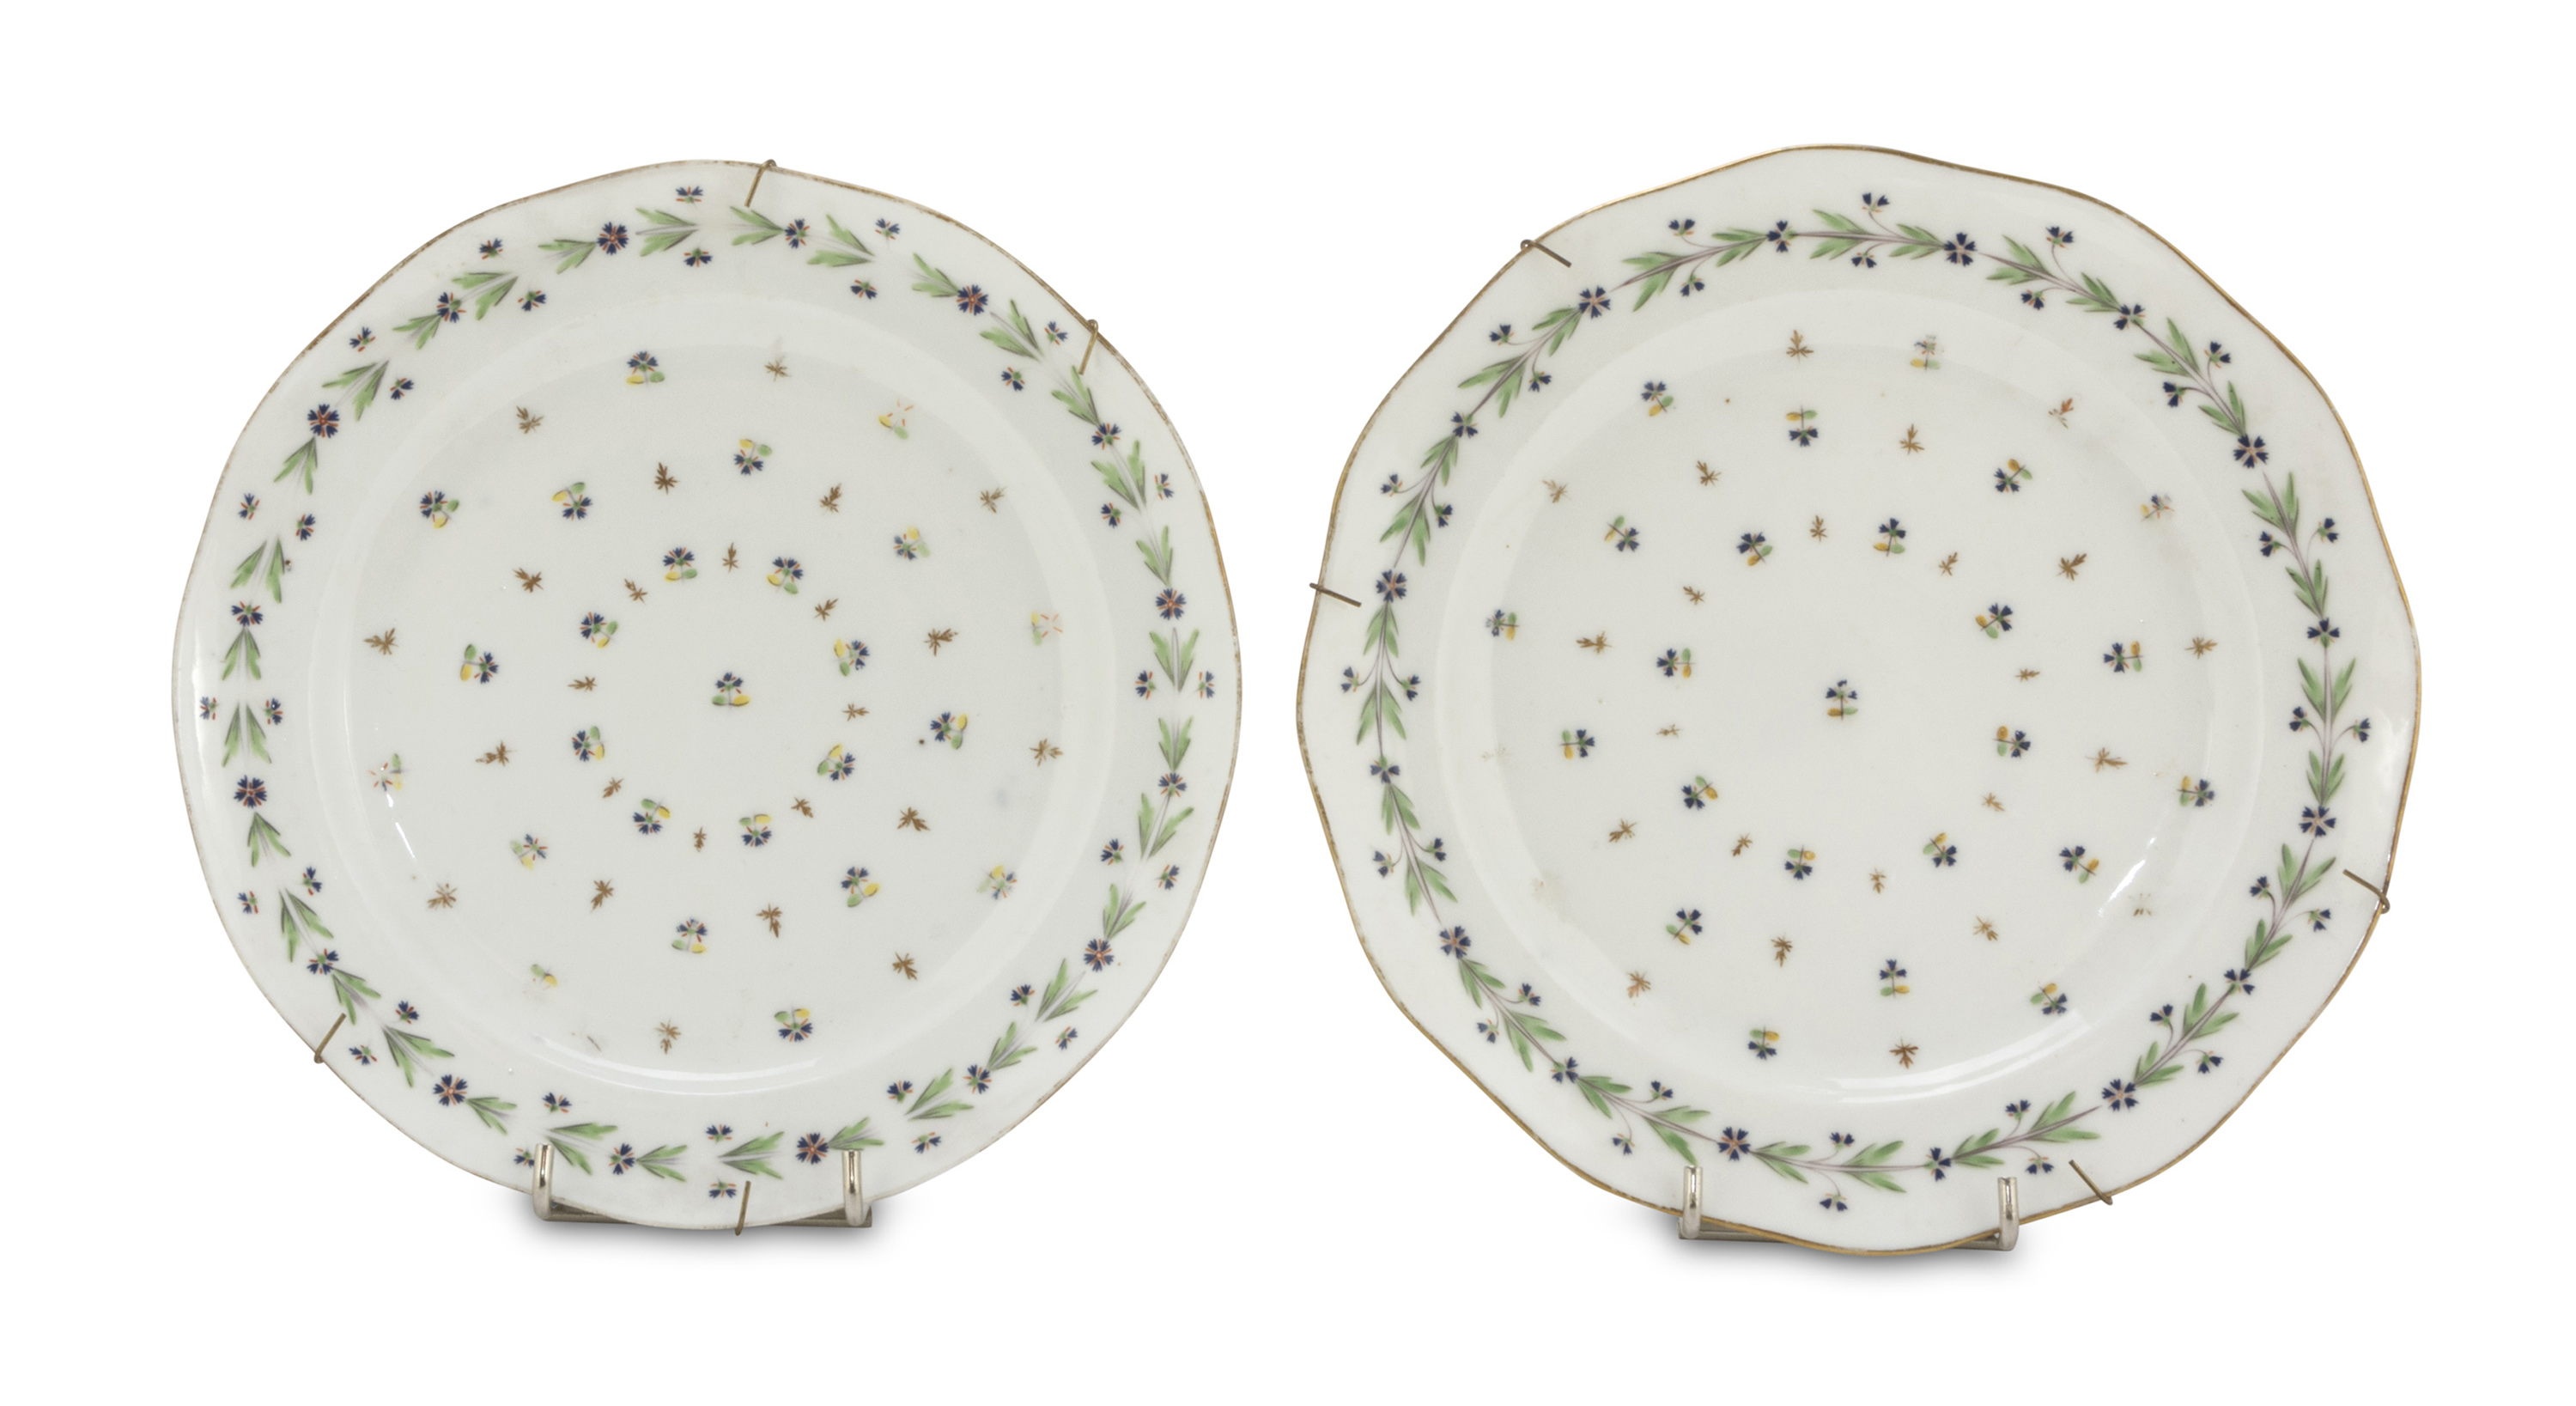 PAIR OF PORCELAIN PLATES PROBABLY FRANCE EARLY 19TH CENTURY